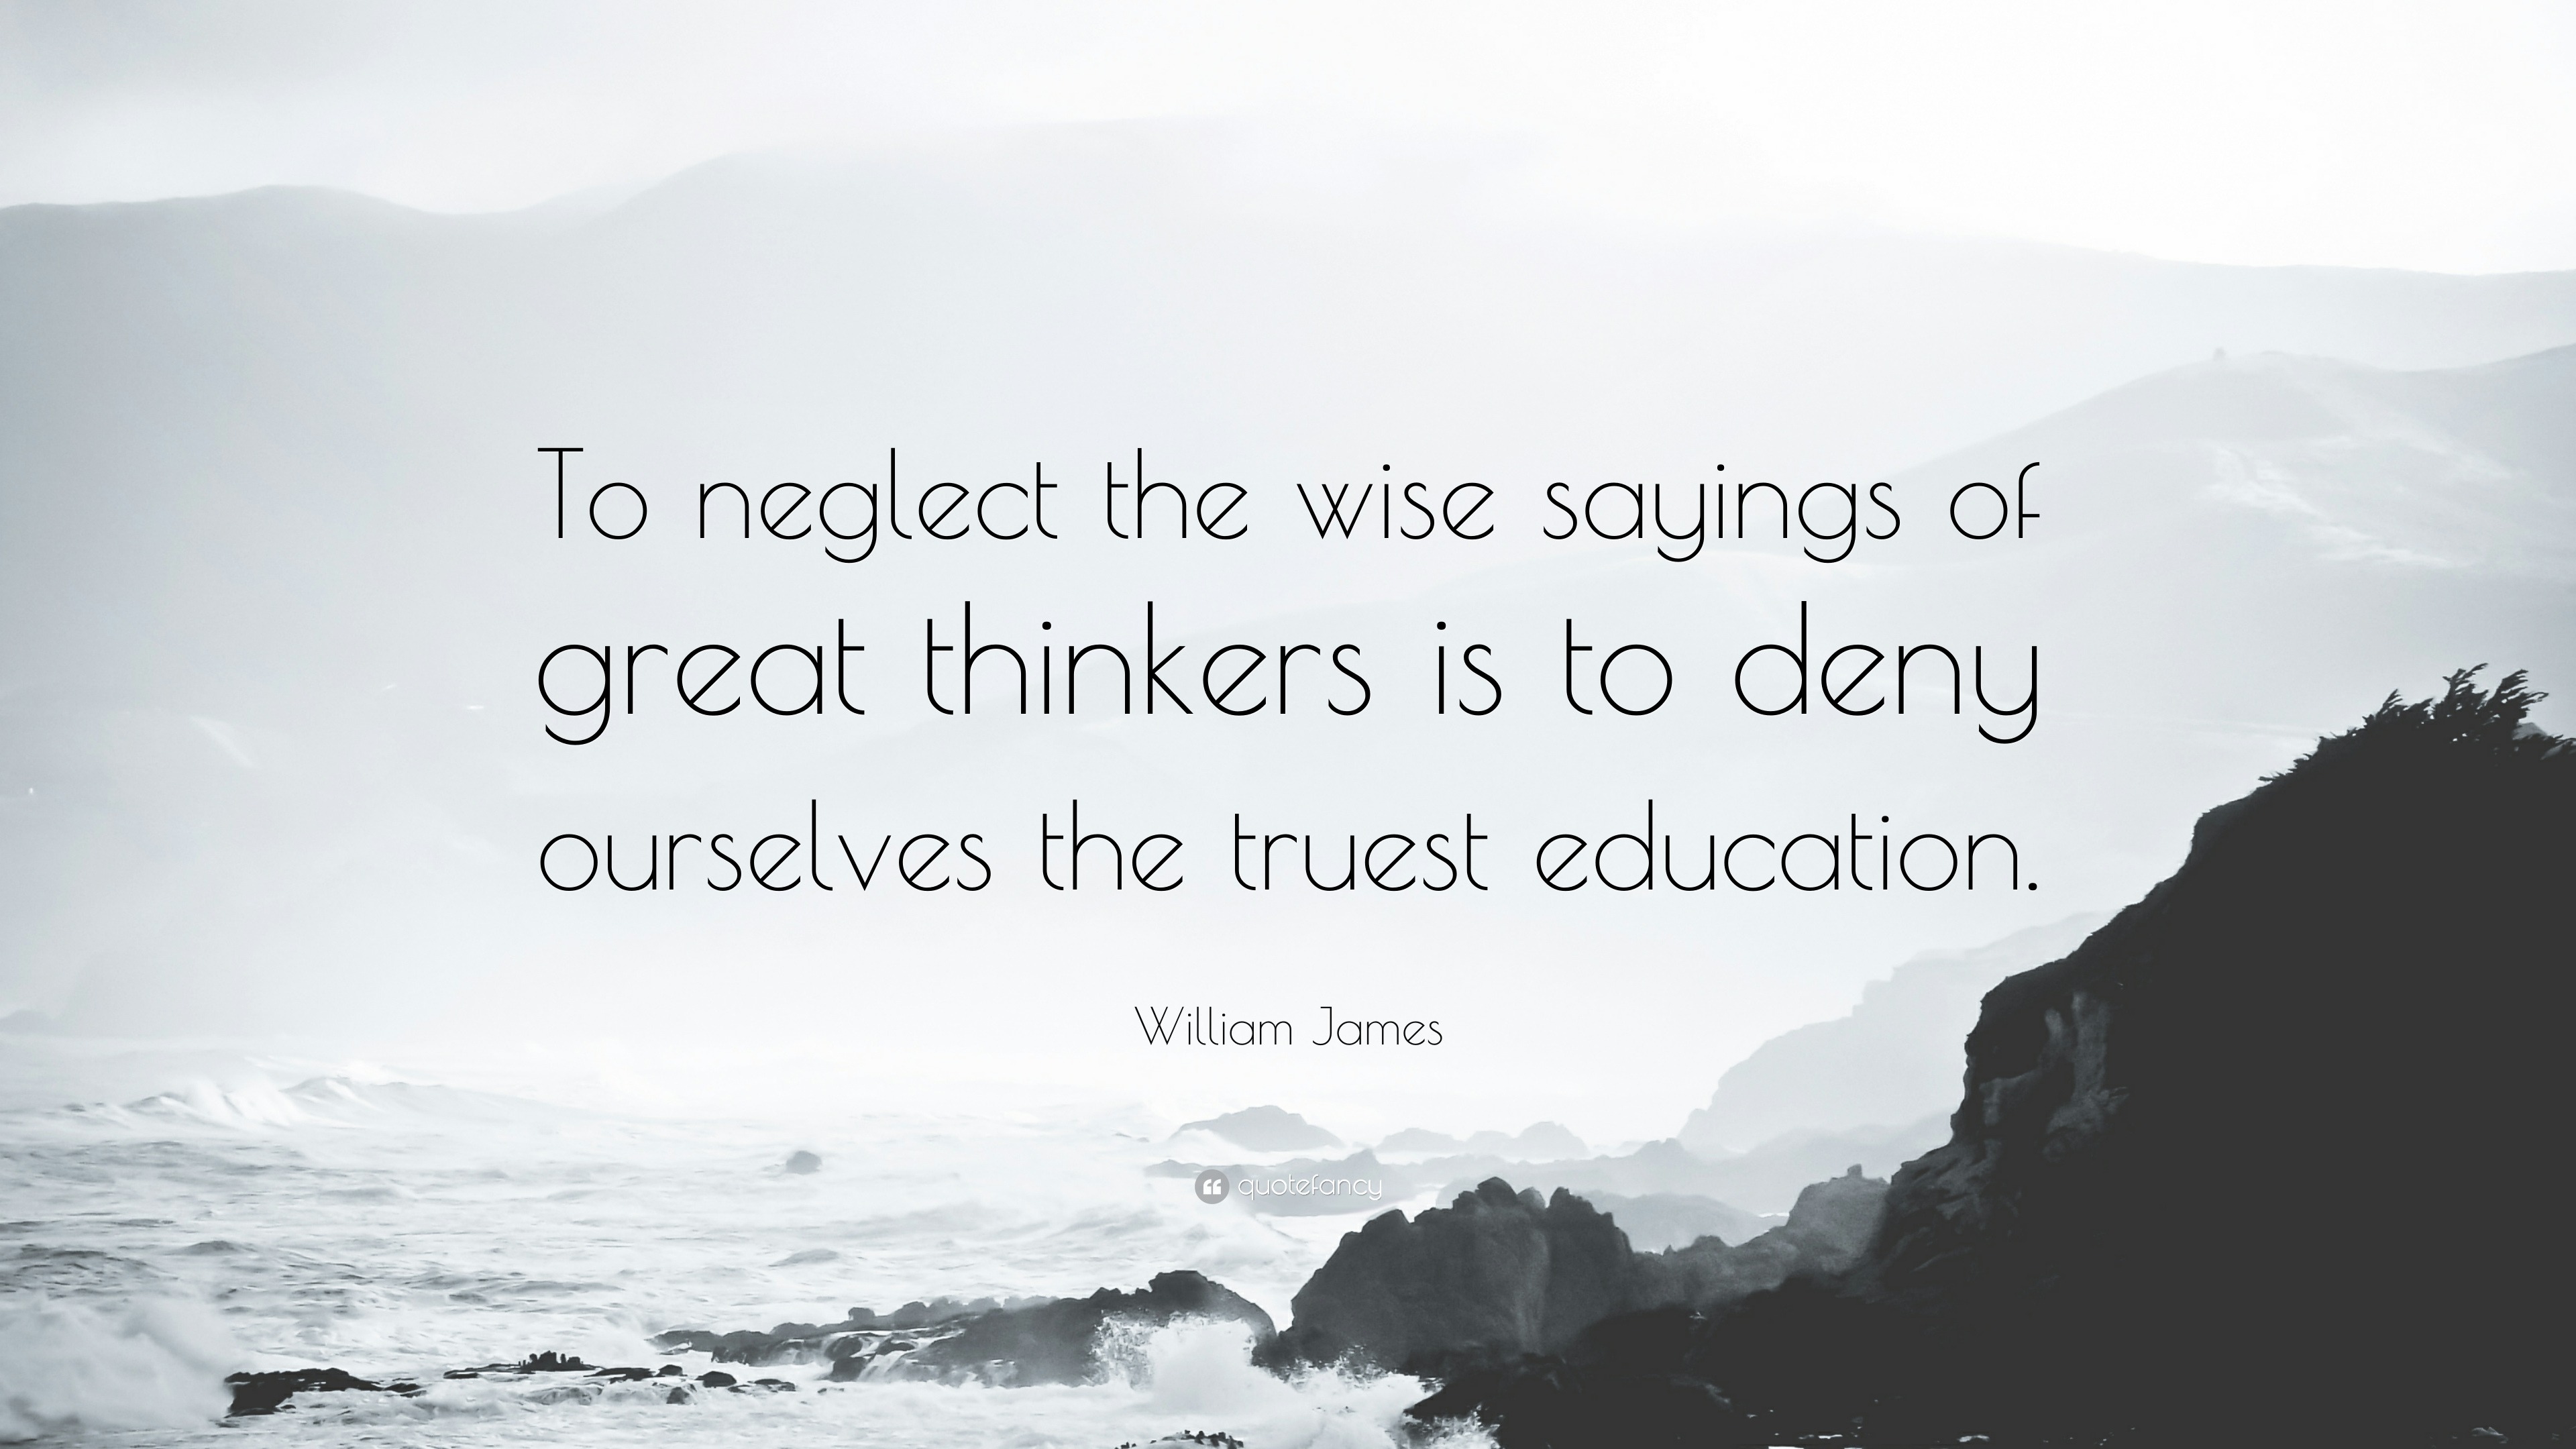 William James Quote To Neglect The Wise Sayings Of Great Thinkers Is To Deny Ourselves The